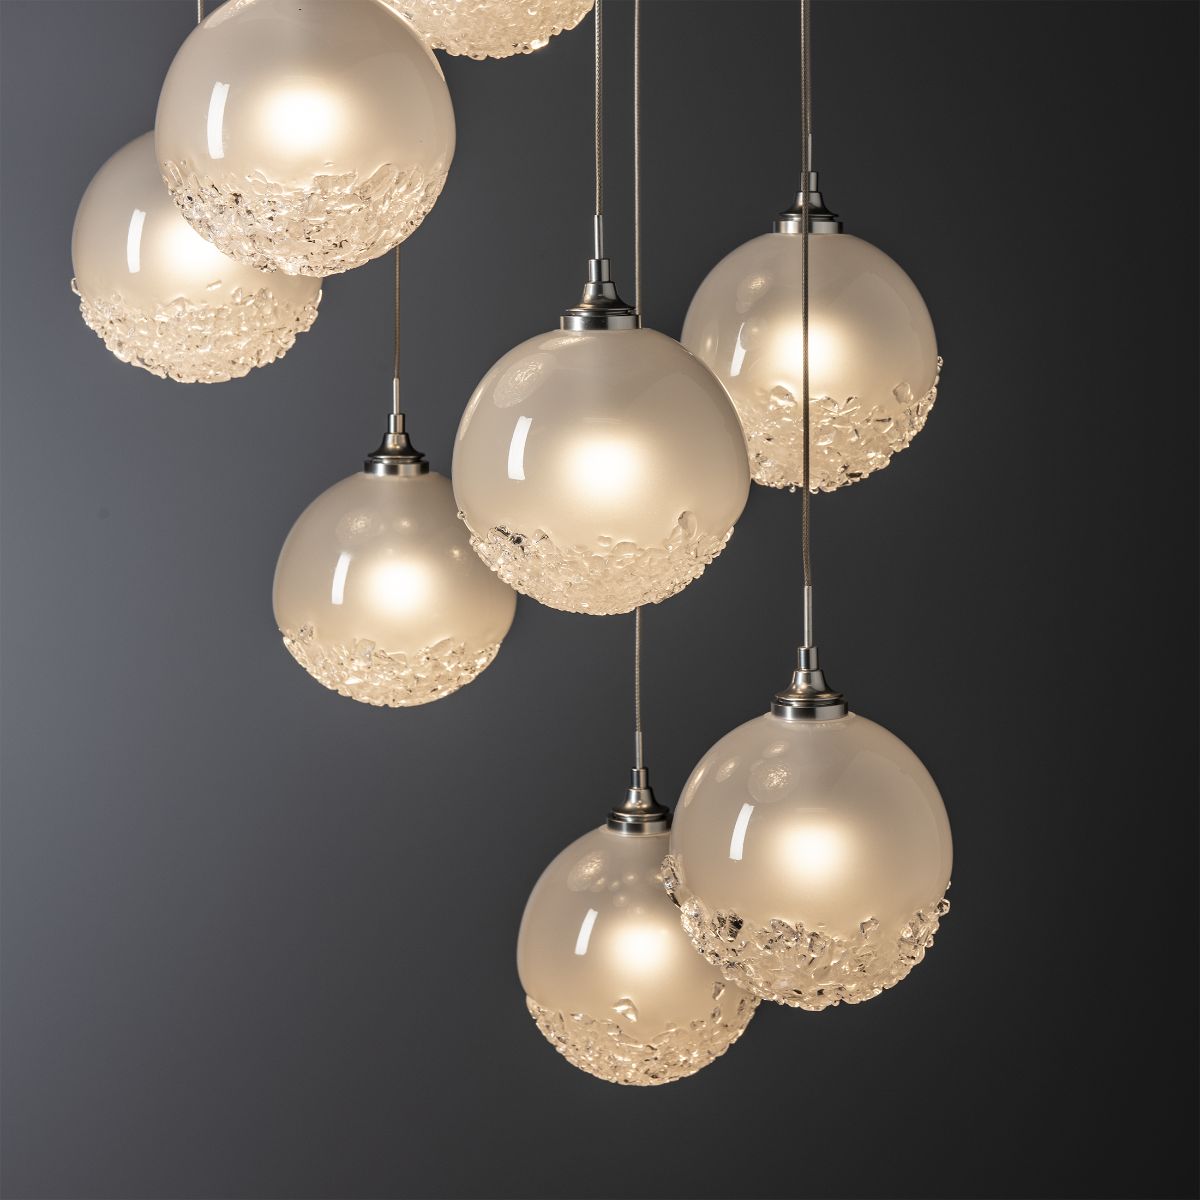 Fritz 21 in. 9 lights Pendant Light with Standard Height